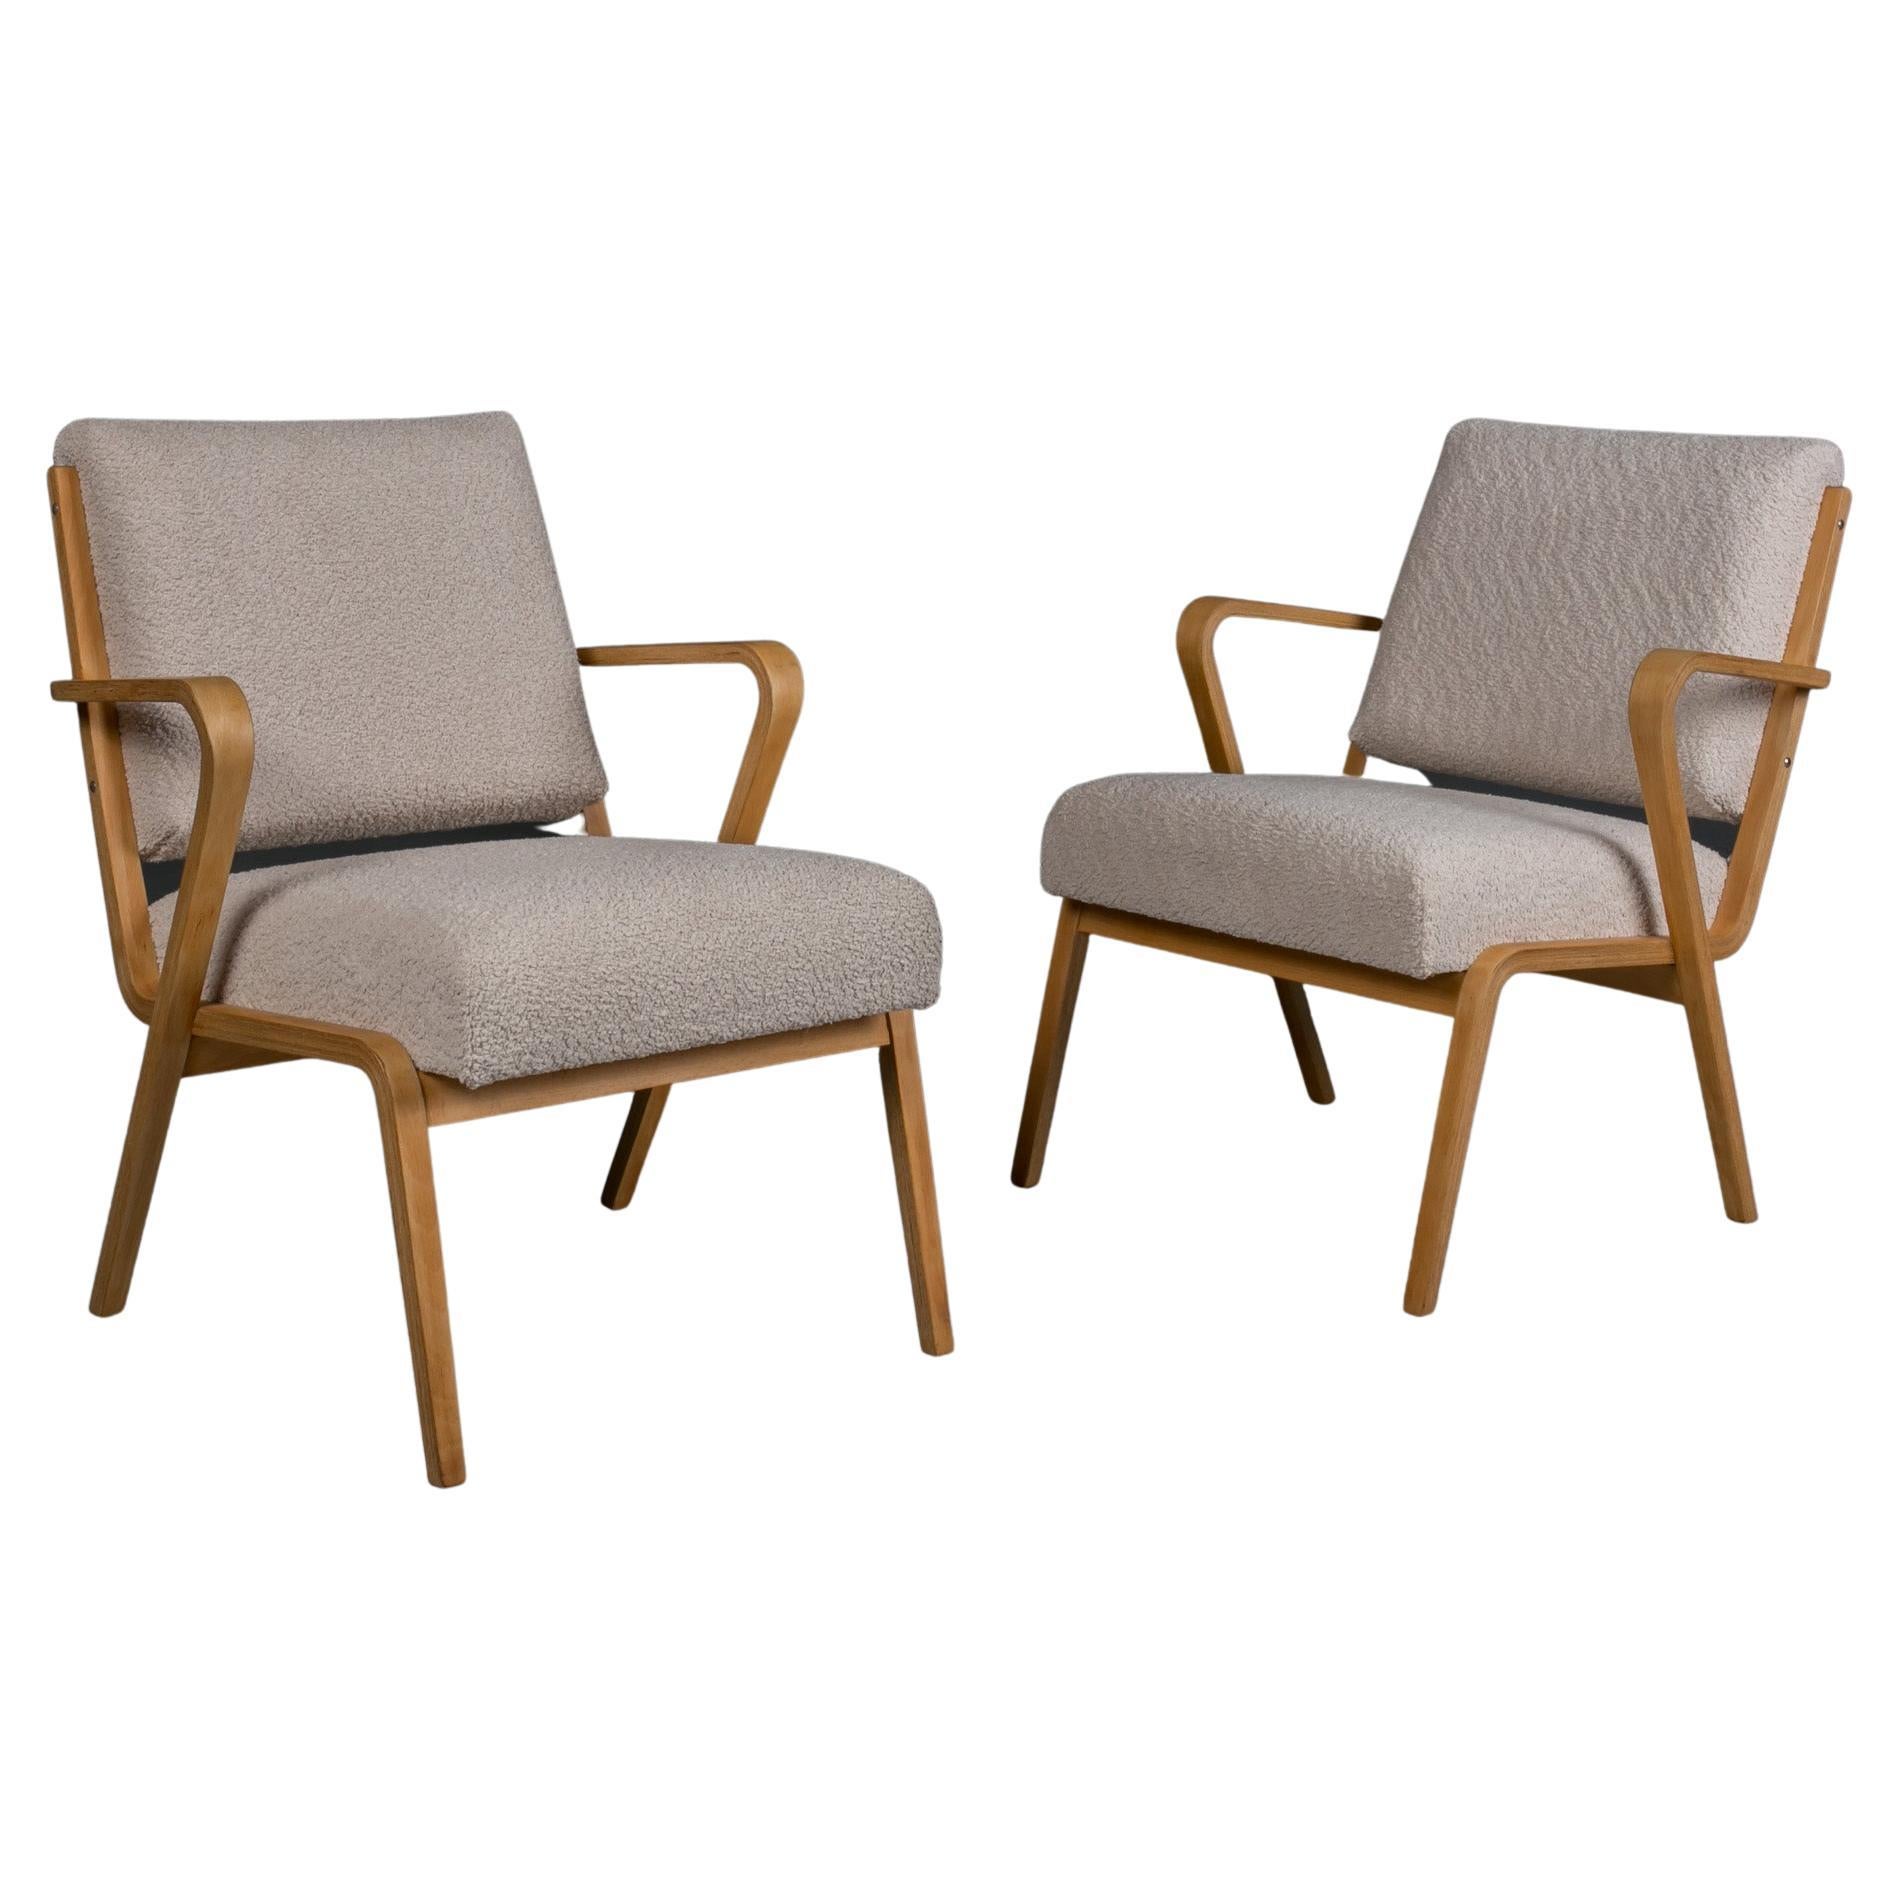 Set of Two Lounge Chairs by S. Selmanagić, 1960s, Reupholstered in Creamy Boucle For Sale